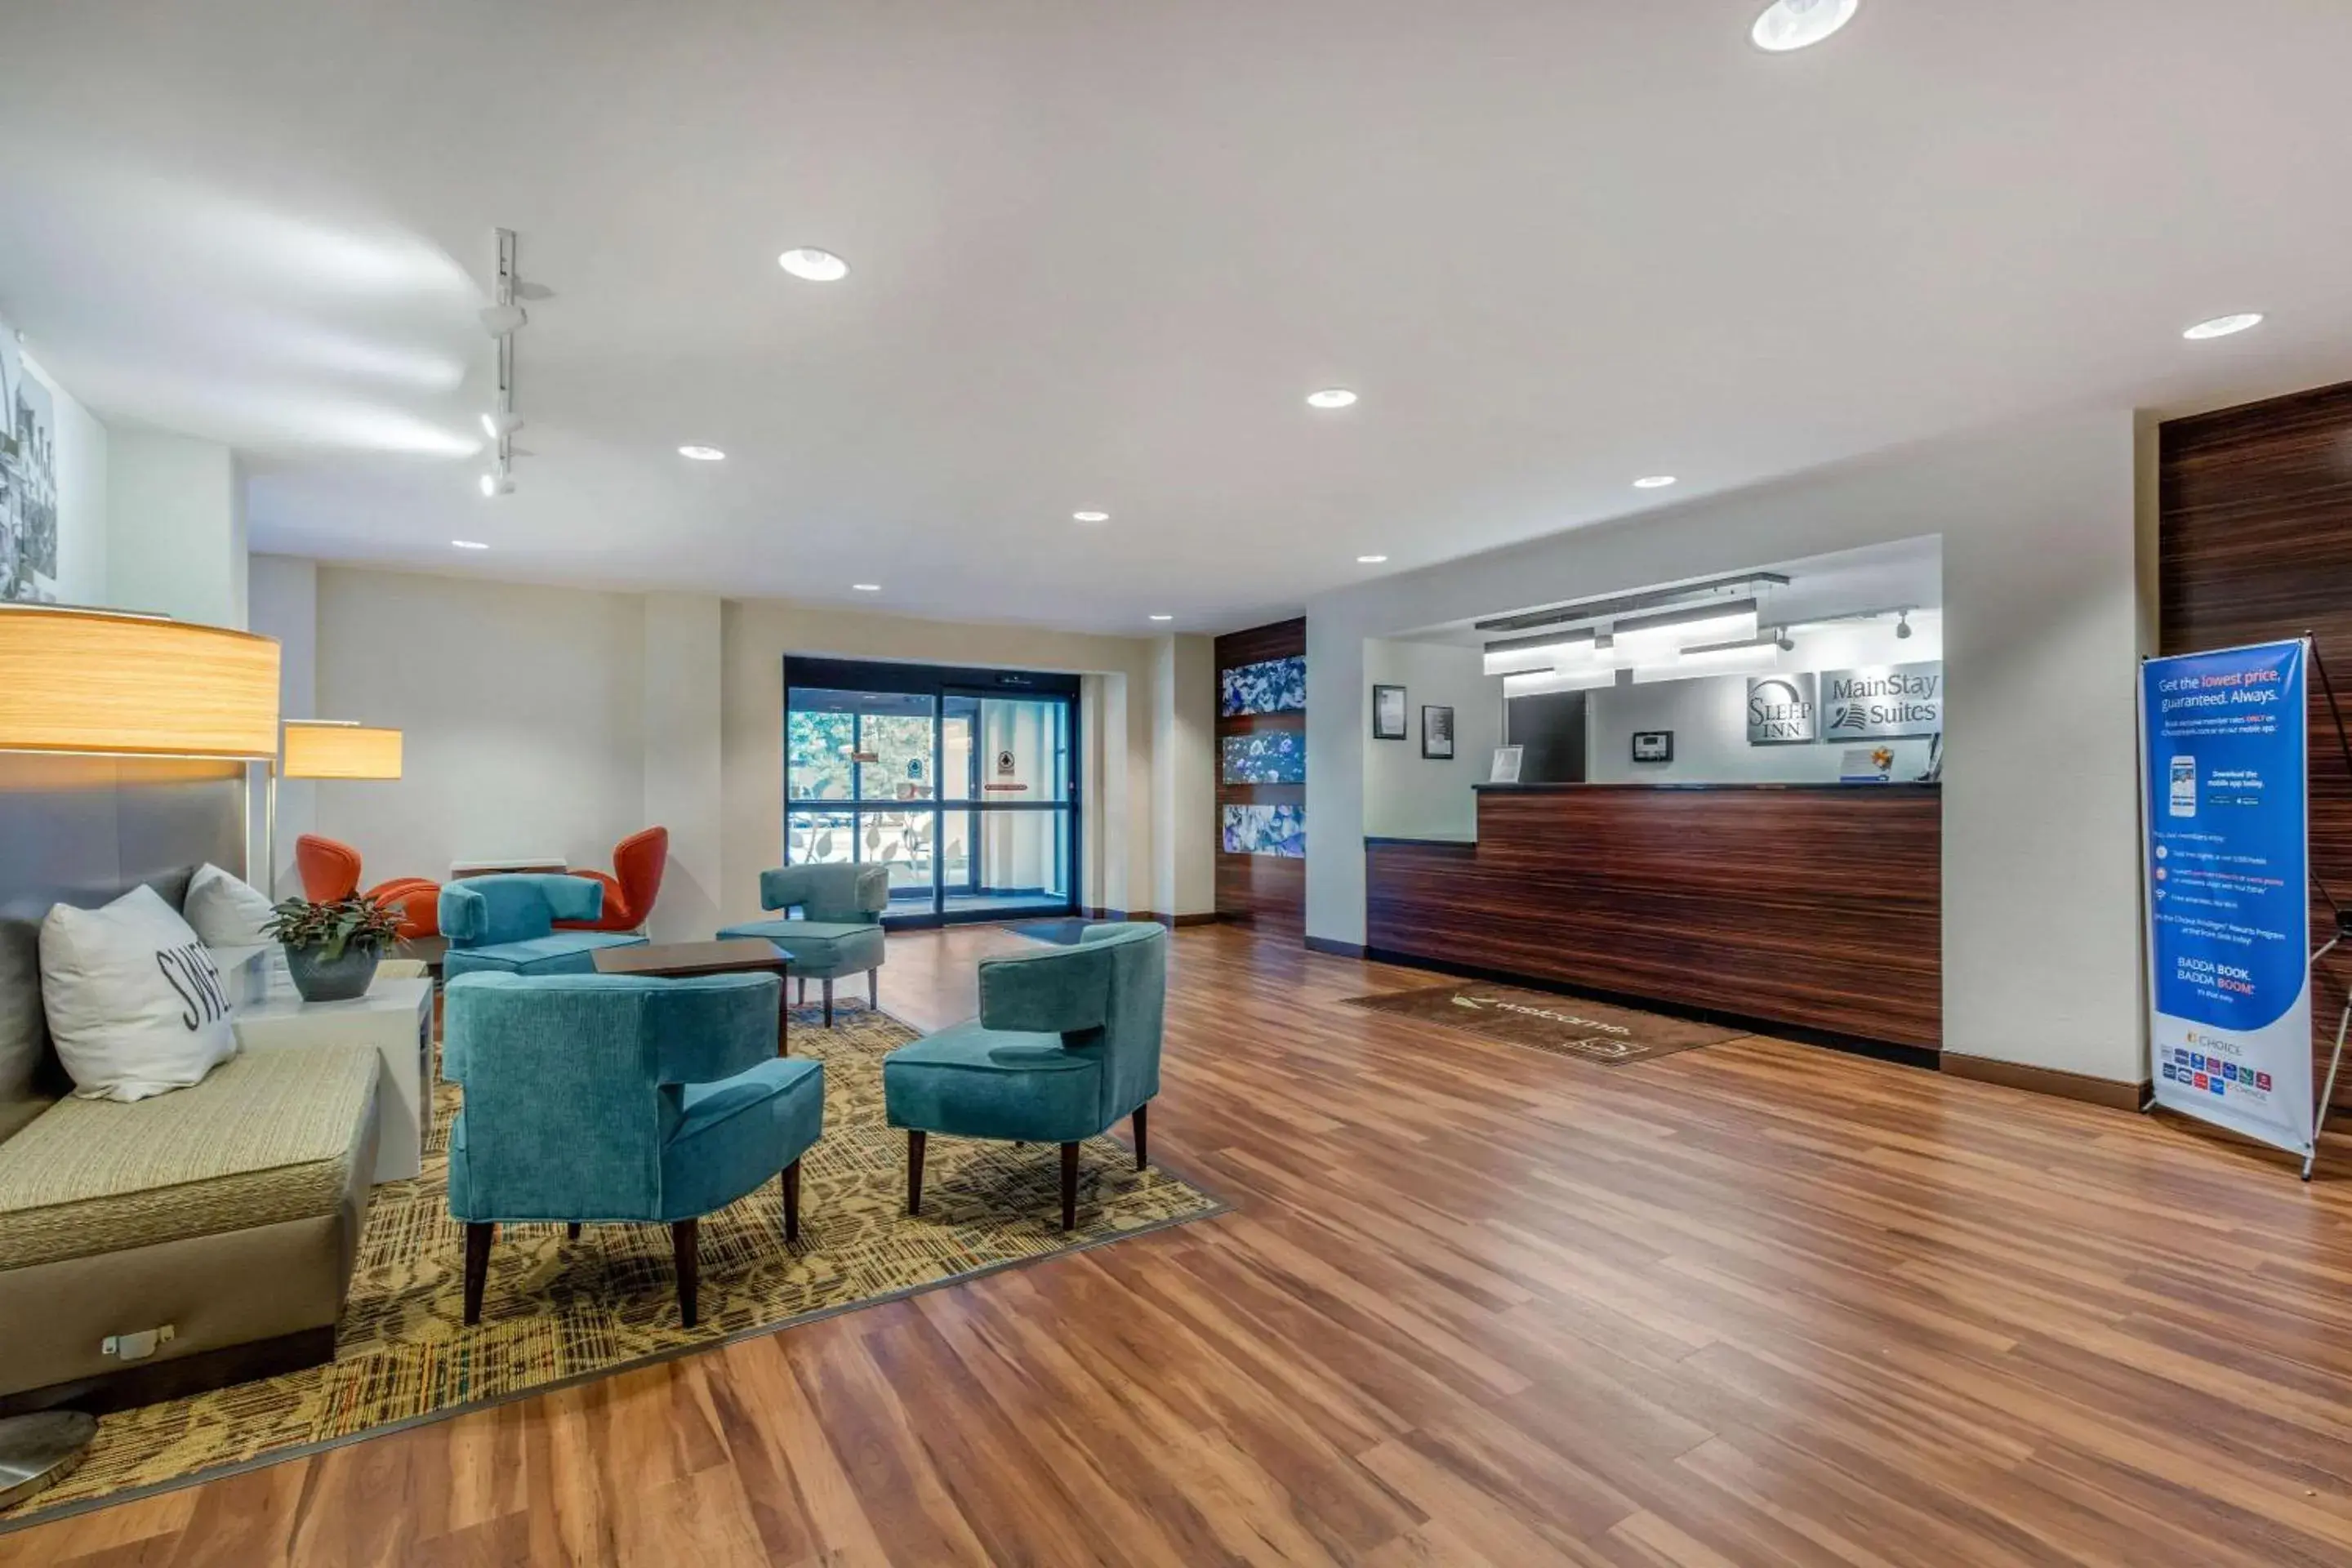 Lobby or reception in MainStay Suites St. Louis - Airport